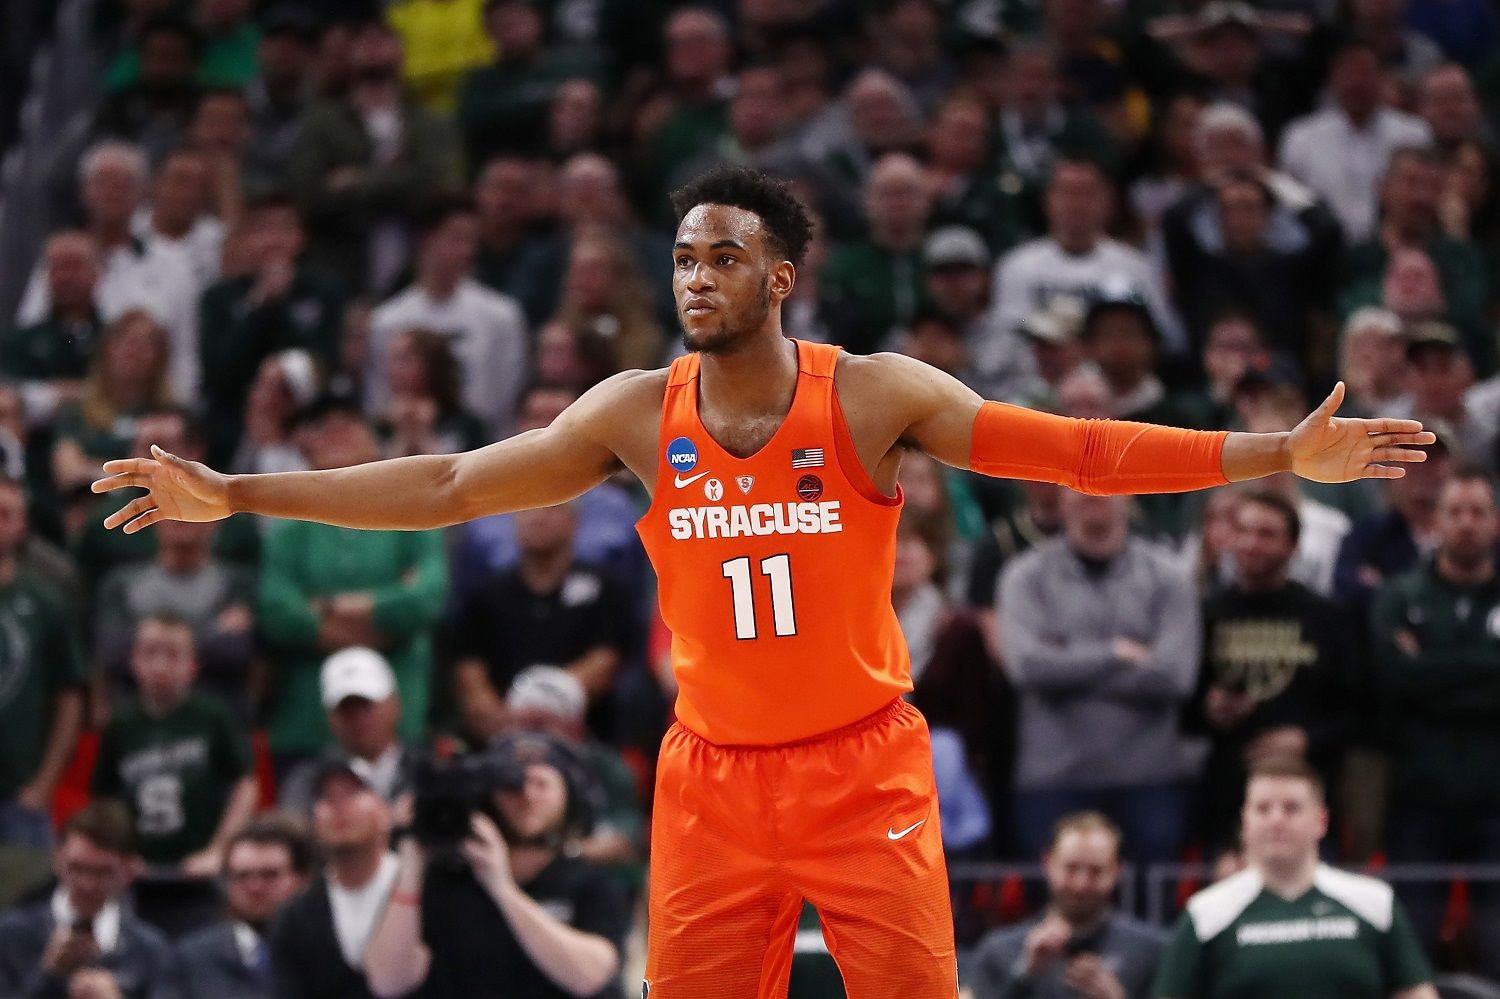 DETROIT, MI - MARCH 18:  Oshae Brissett #11 of the Syracuse Orange plays defense during the second half against the Michigan State Spartans in the second round of the 2018 NCAA Men's Basketball Tournament at Little Caesars Arena on March 18, 2018 in Detroit, Michigan.  (Photo by Elsa/Getty Images)